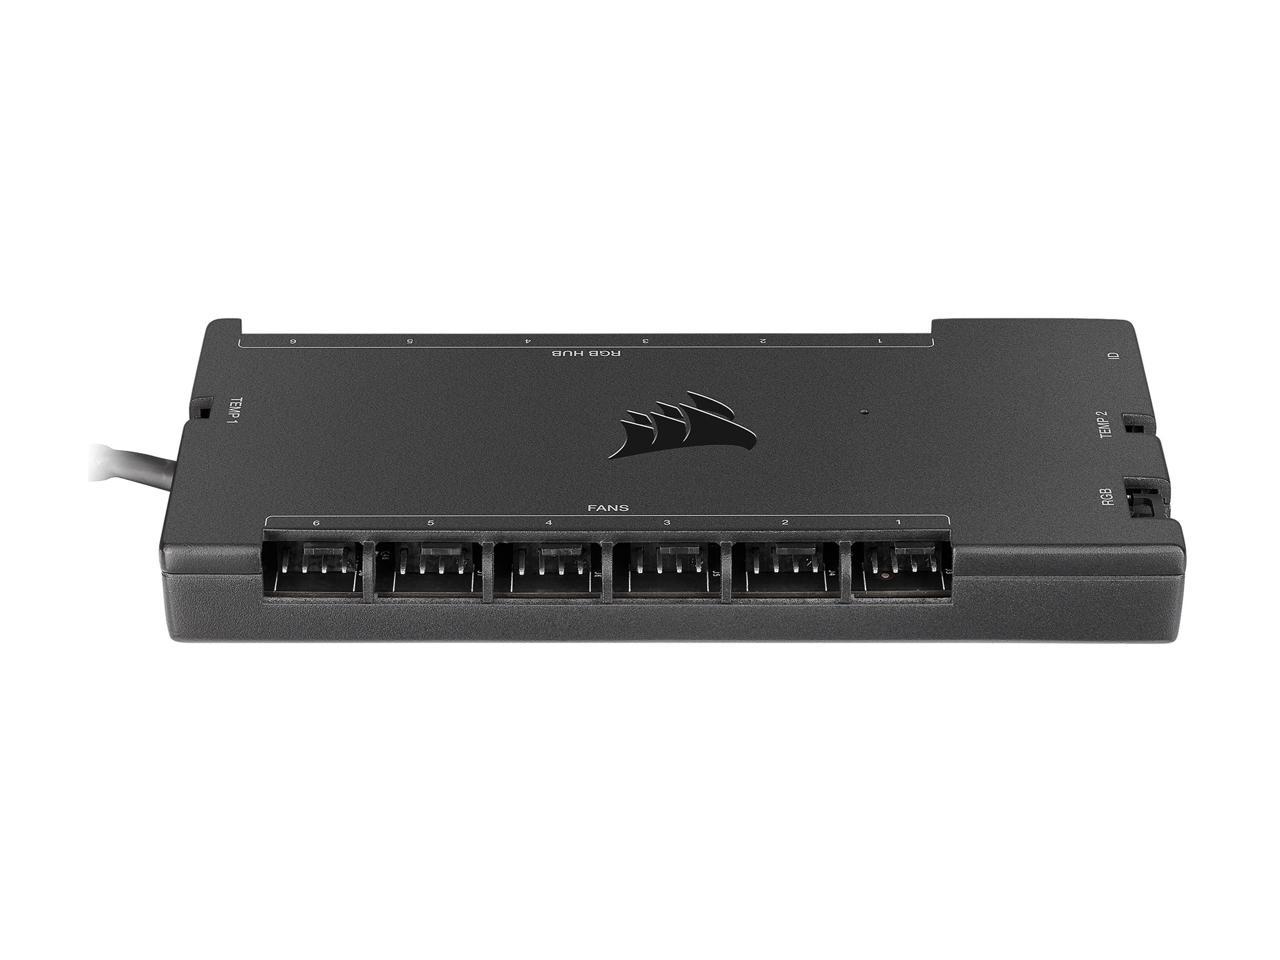 CORSAIR iCUE COMMANDER CORE XT Smart RGB Lighting and Fan Speed Controller - image 5 of 11